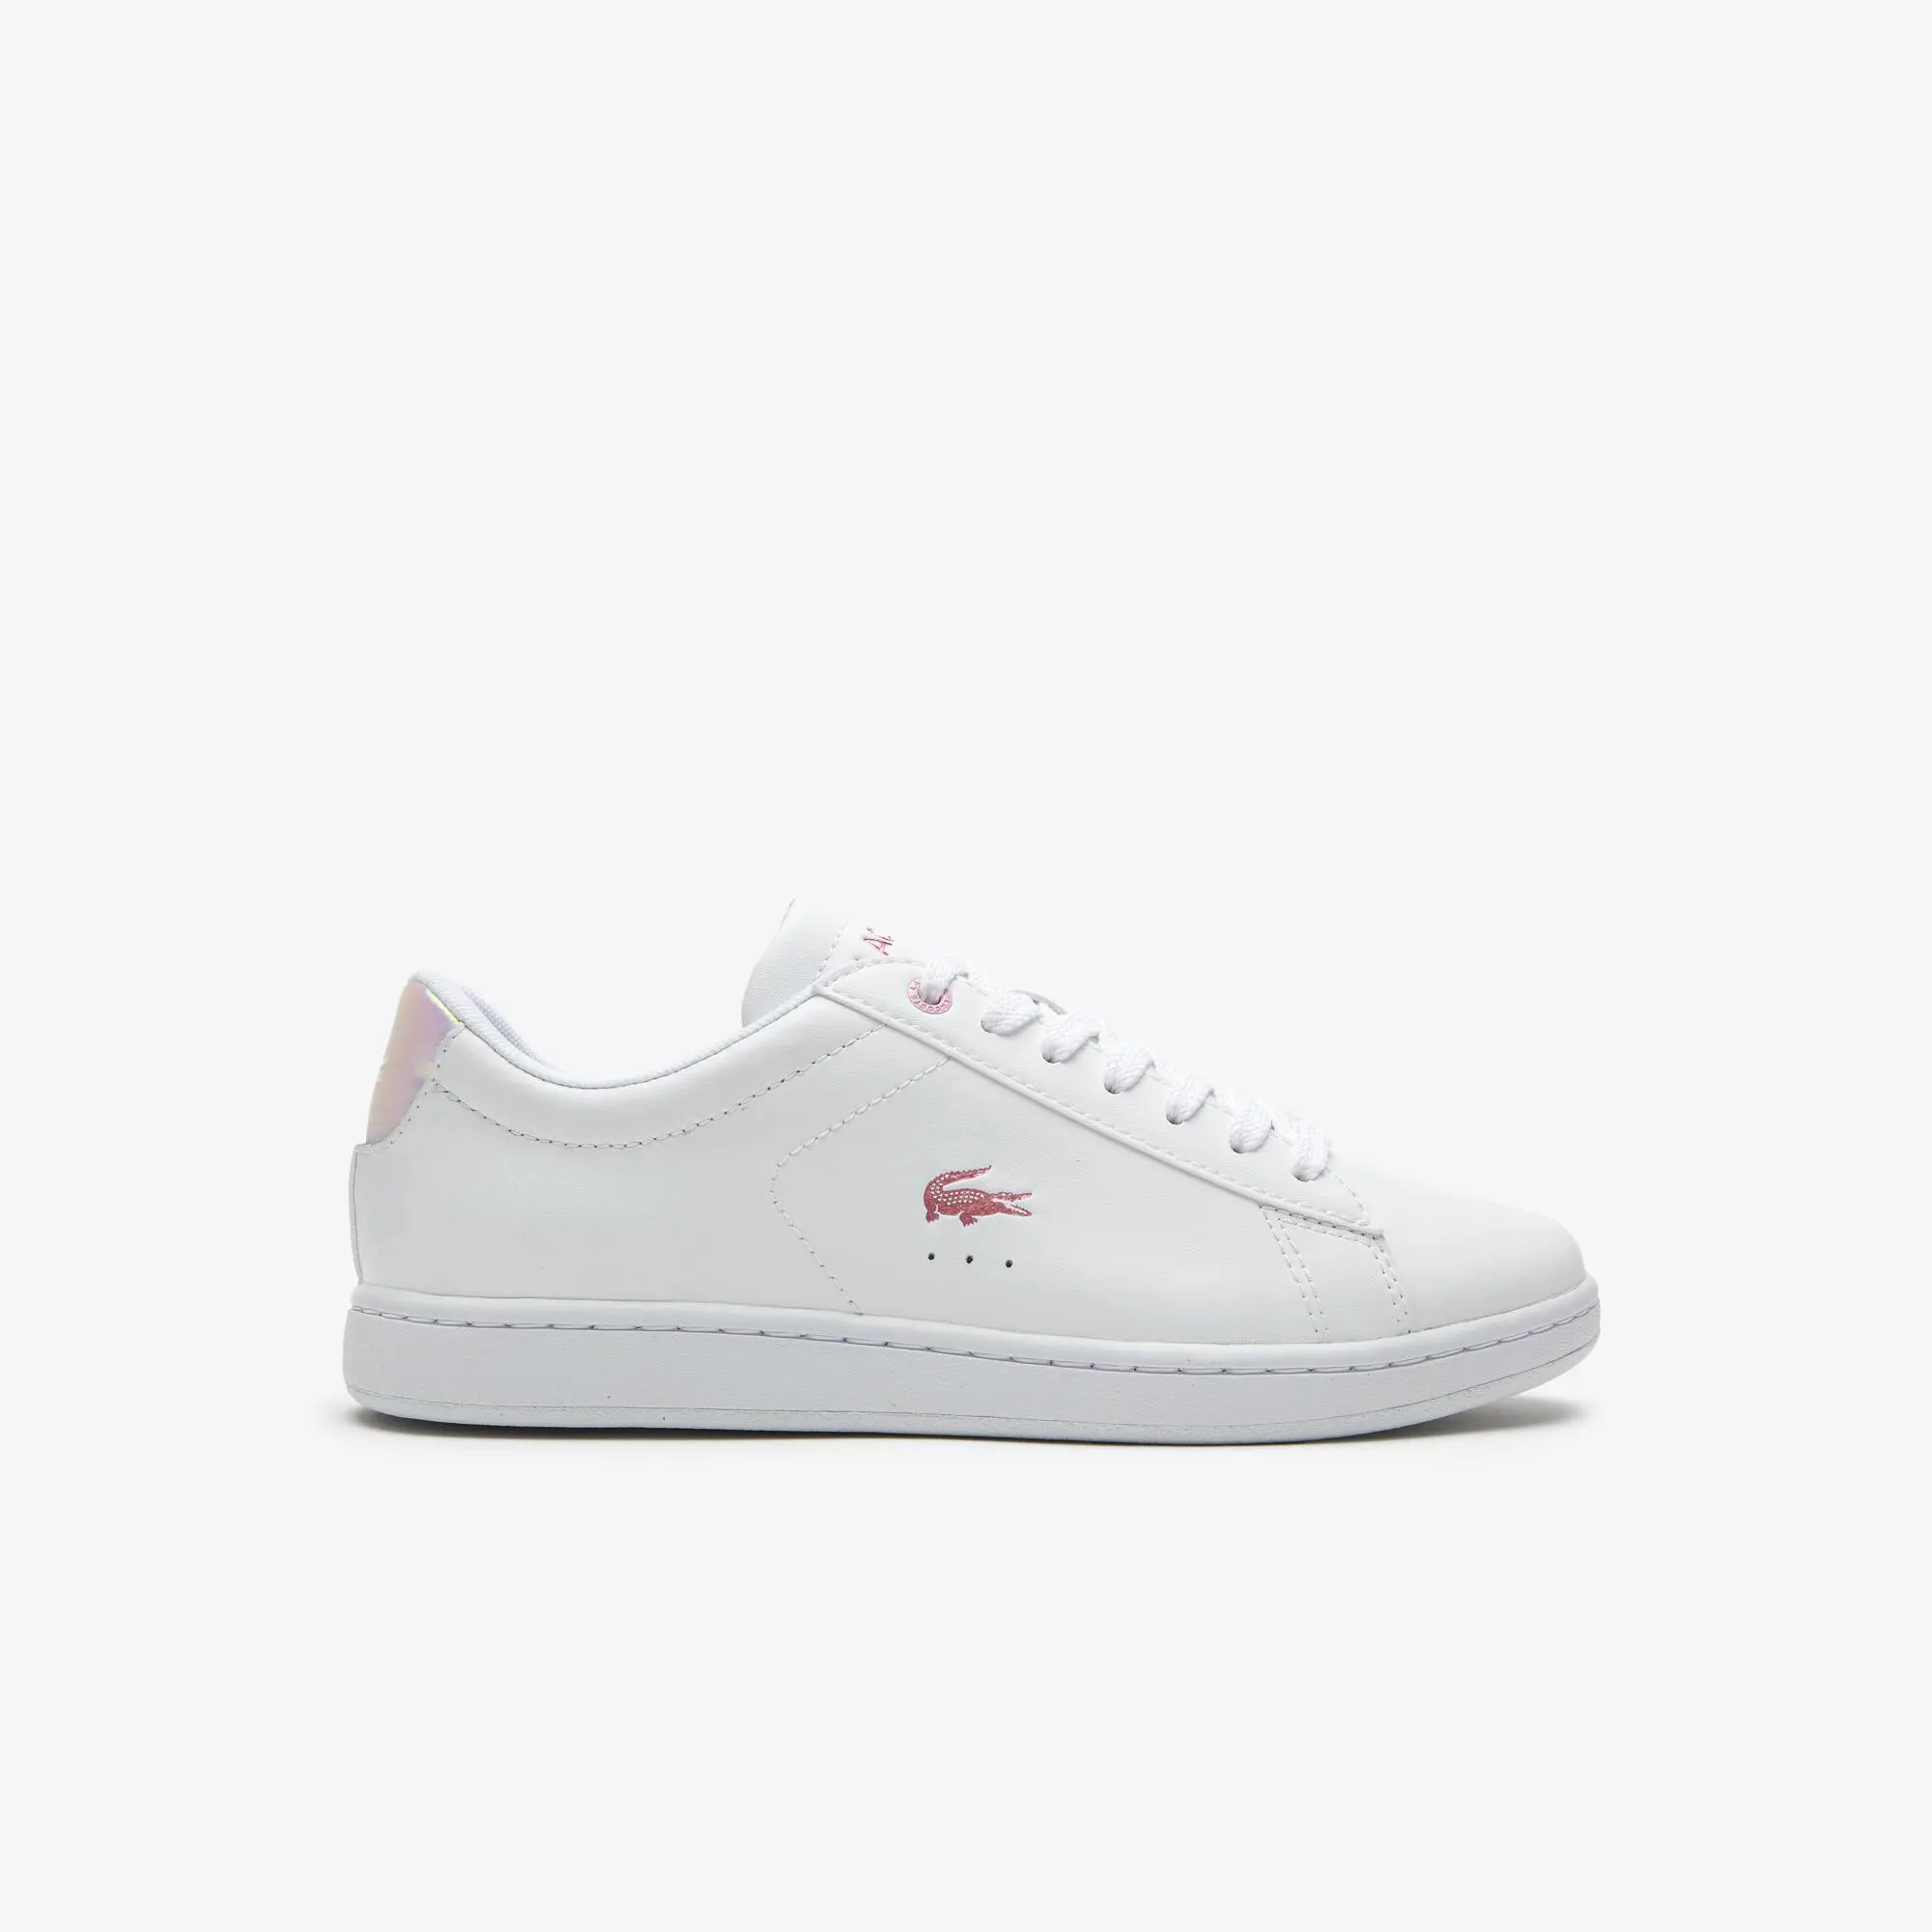 Lacoste Women's Lacoste Carnaby Leather Trainers. 1